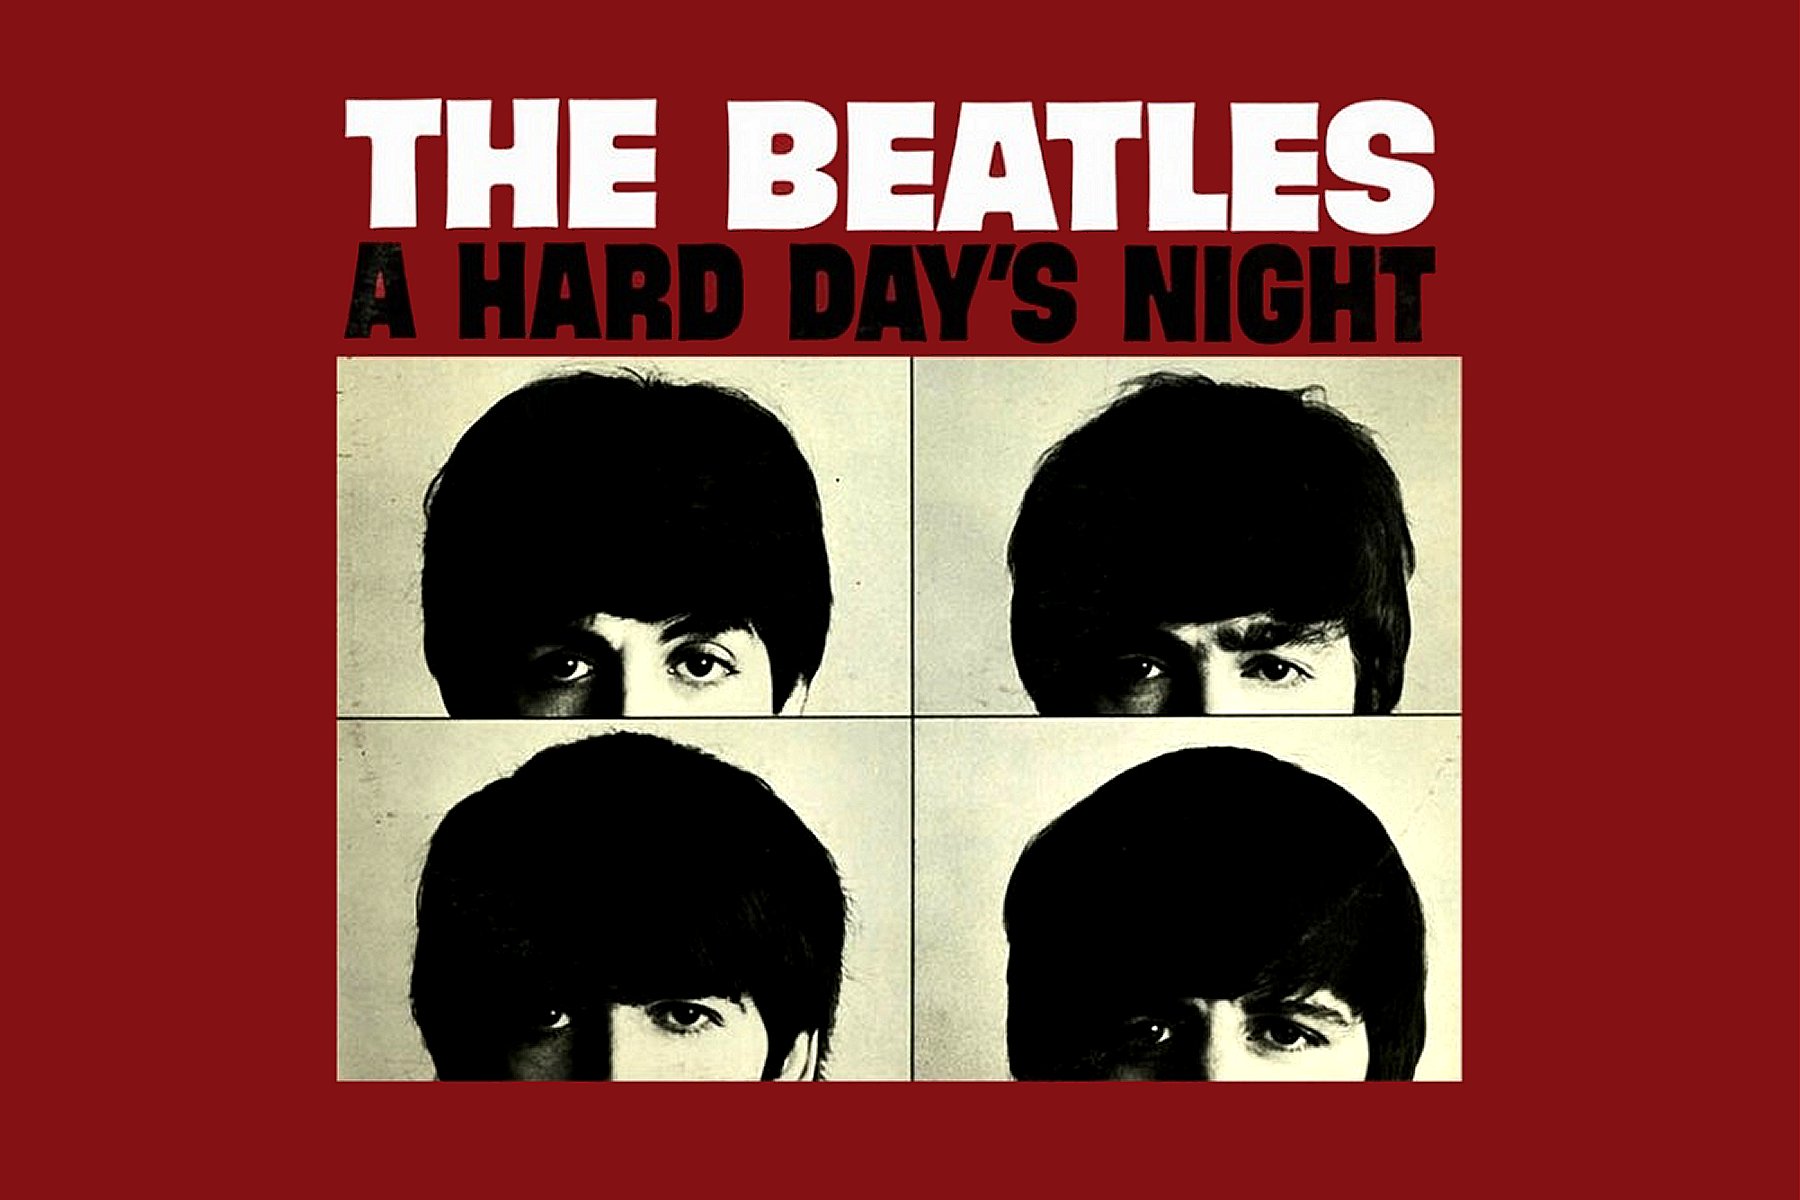 The beatles a hard day s night. Битлз 1964 a hard Day's Night. The Beatles a hard Day's Night обложка. Постер Beatles hard Day's Night. Beatles альбом a hard Days.